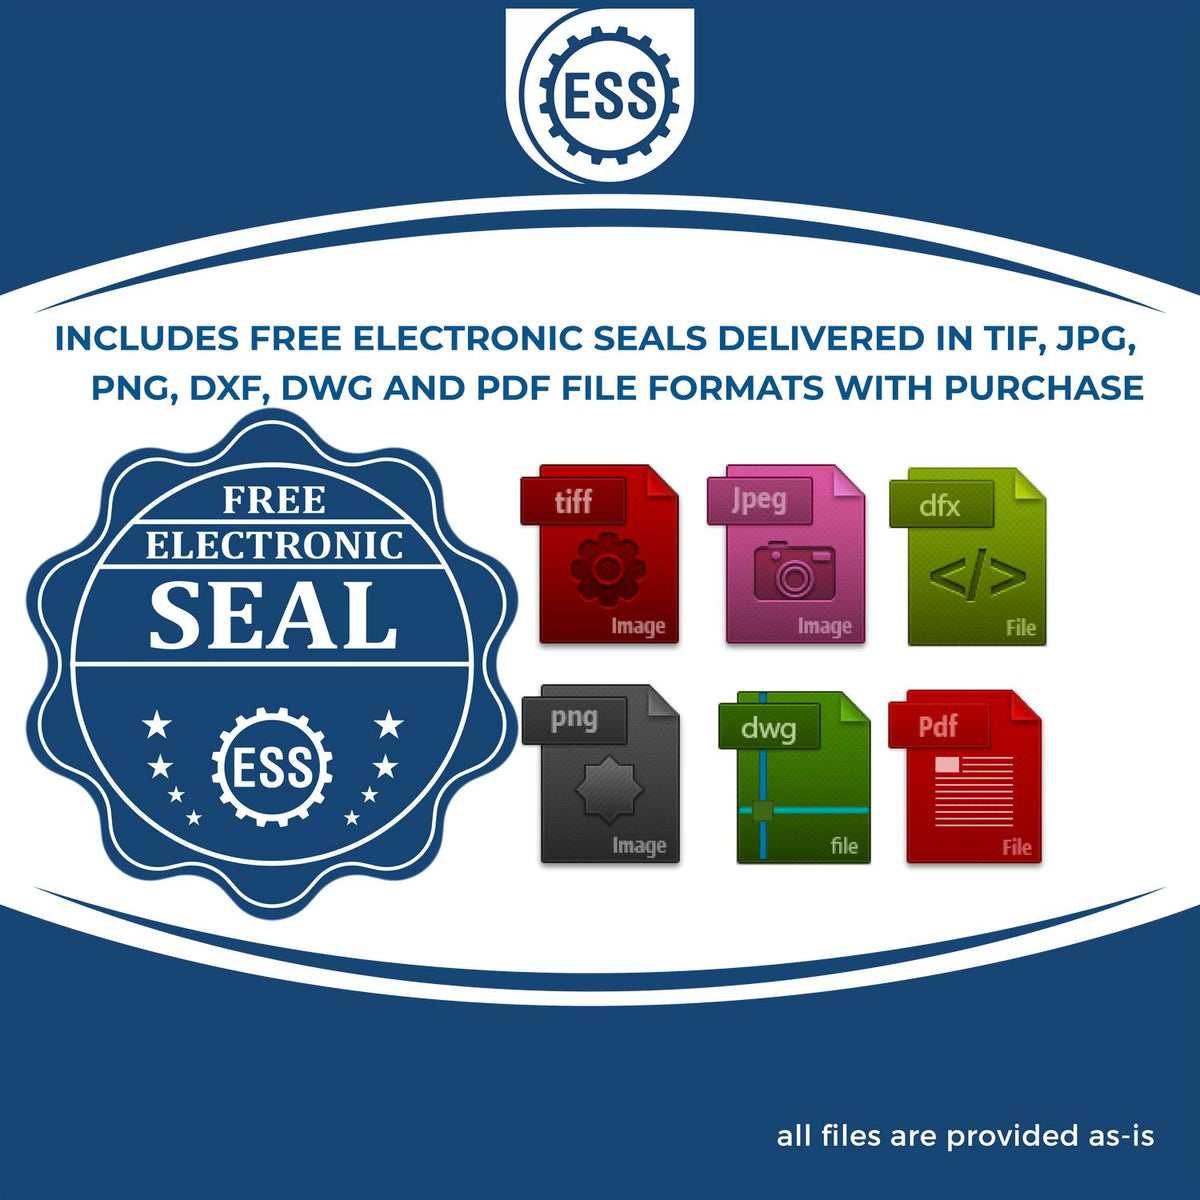 An infographic for the free electronic seal for the Slim Pre-Inked Georgia Architect Seal Stamp illustrating the different file type icons such as DXF, DWG, TIF, JPG and PNG.